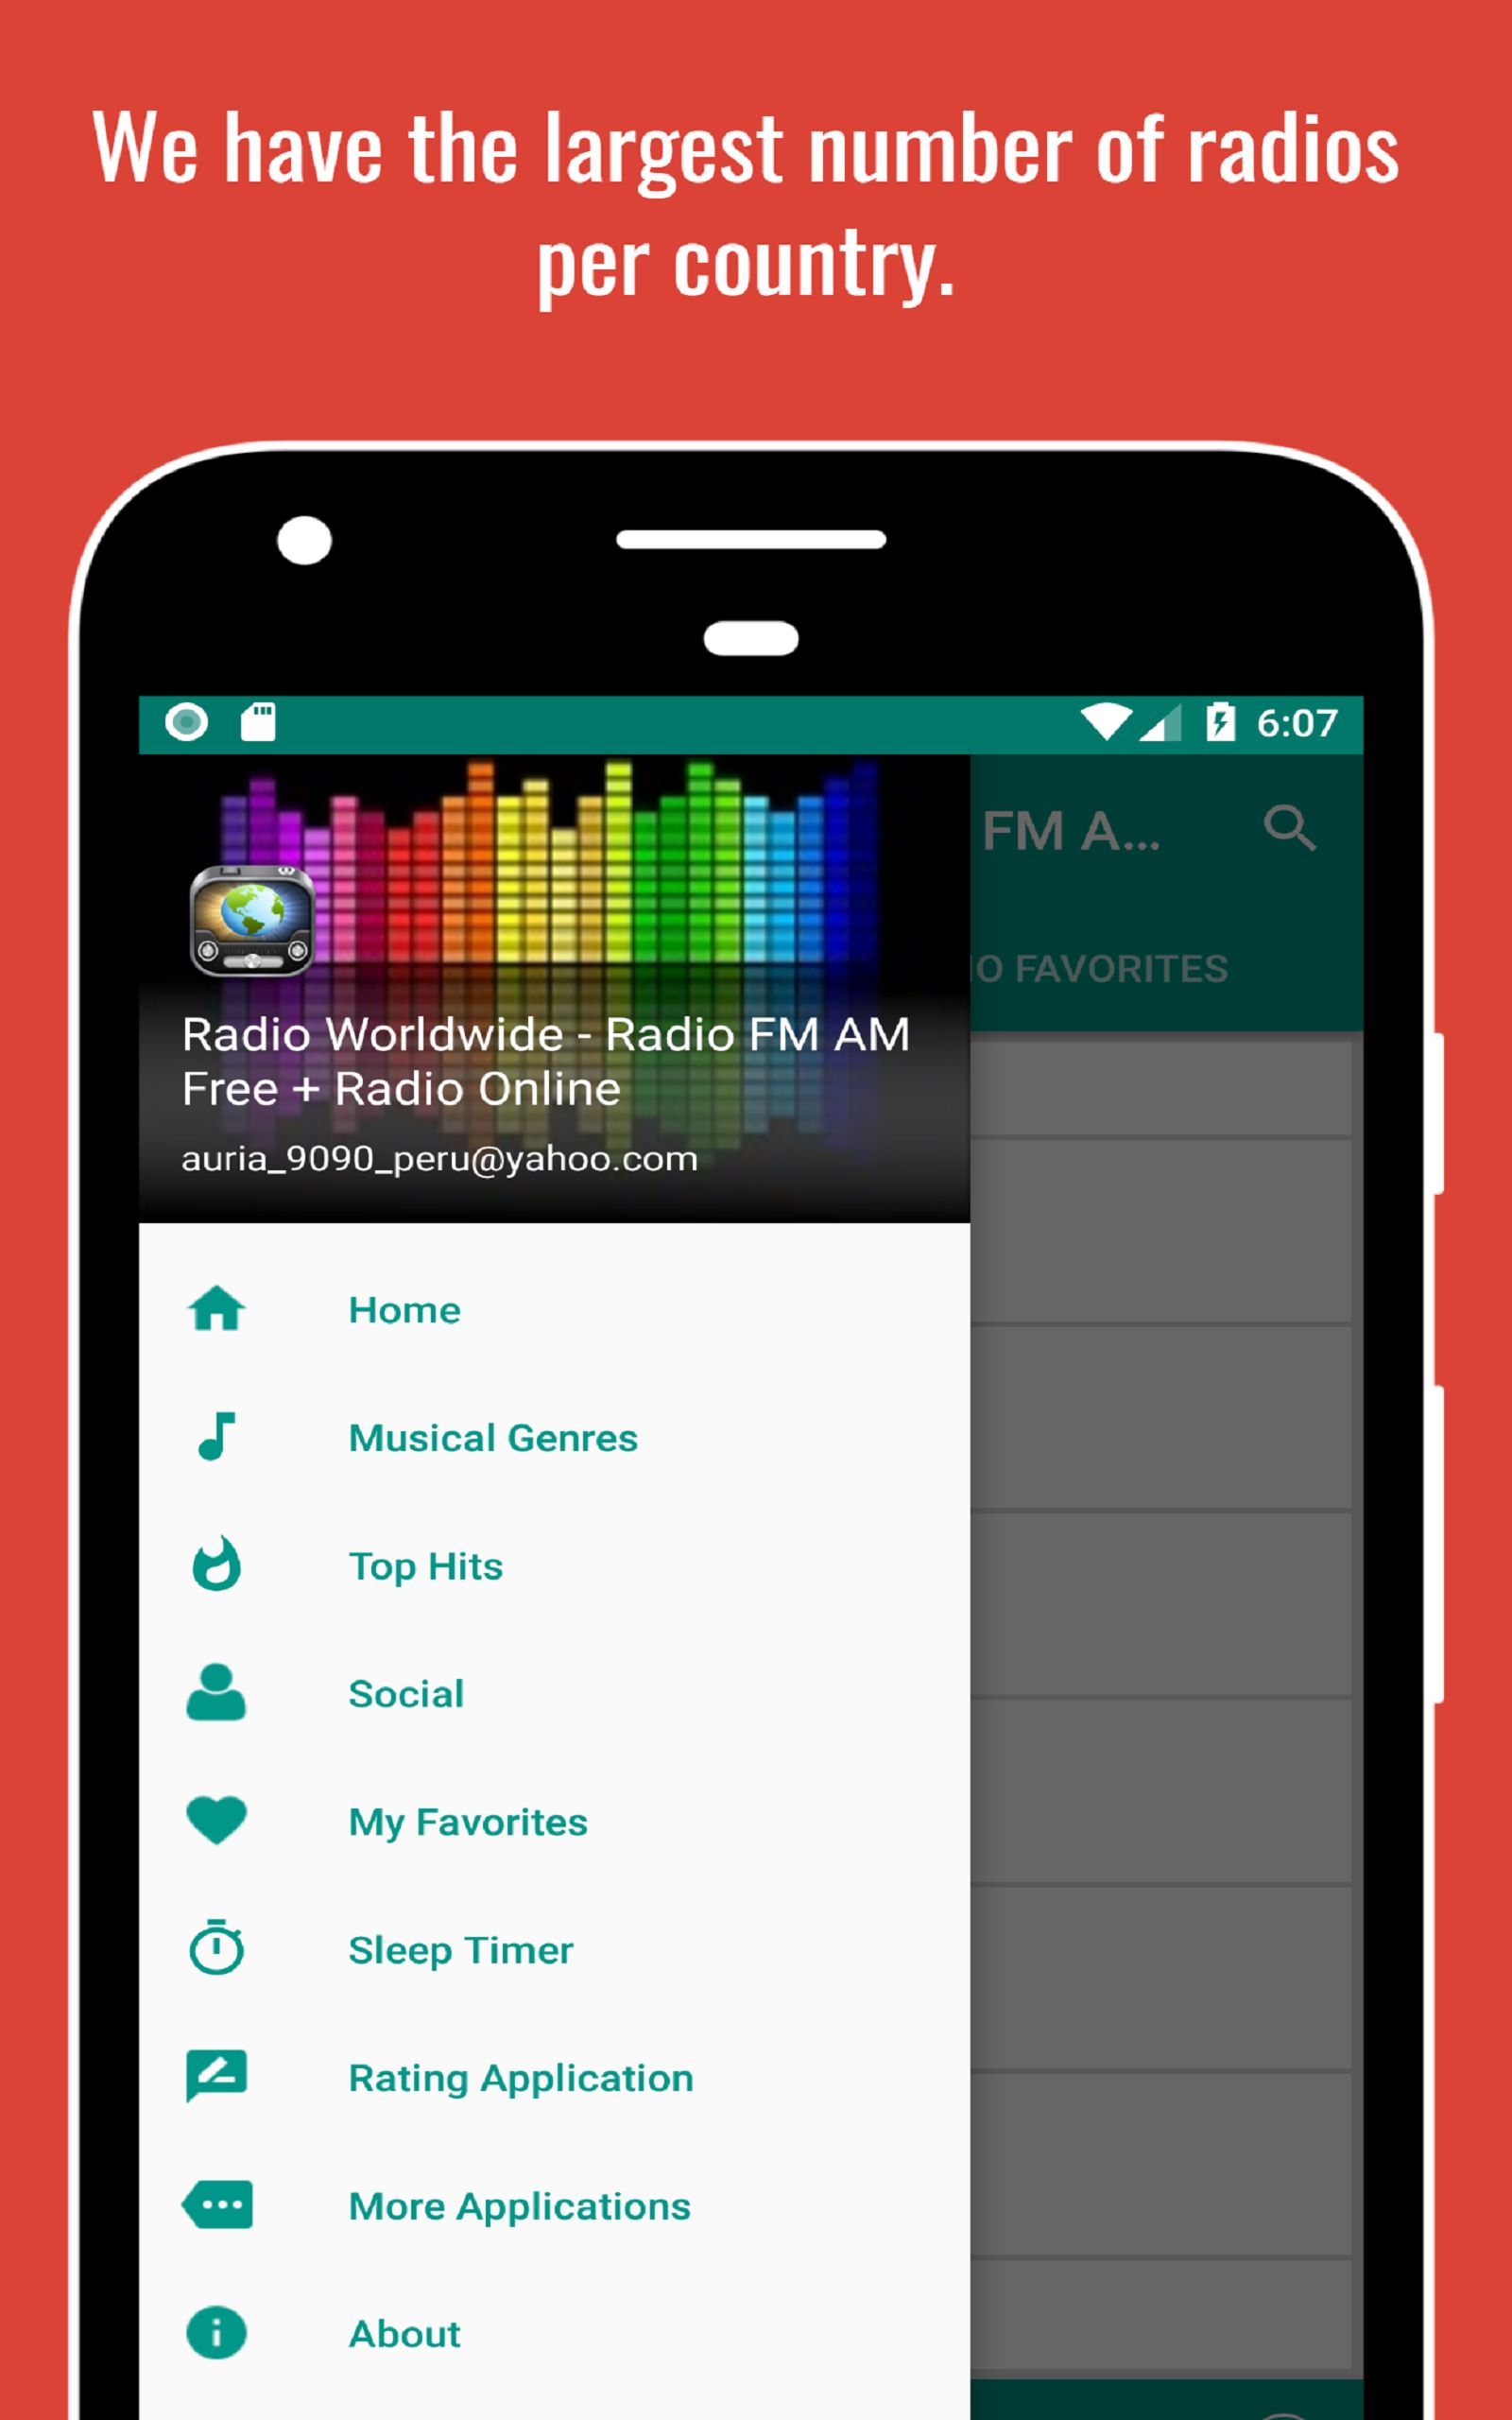 Radio FM AM Free - Radio World online + Radio Worldwide App to Listen to  for Free on  and Android - Microsoft Apps